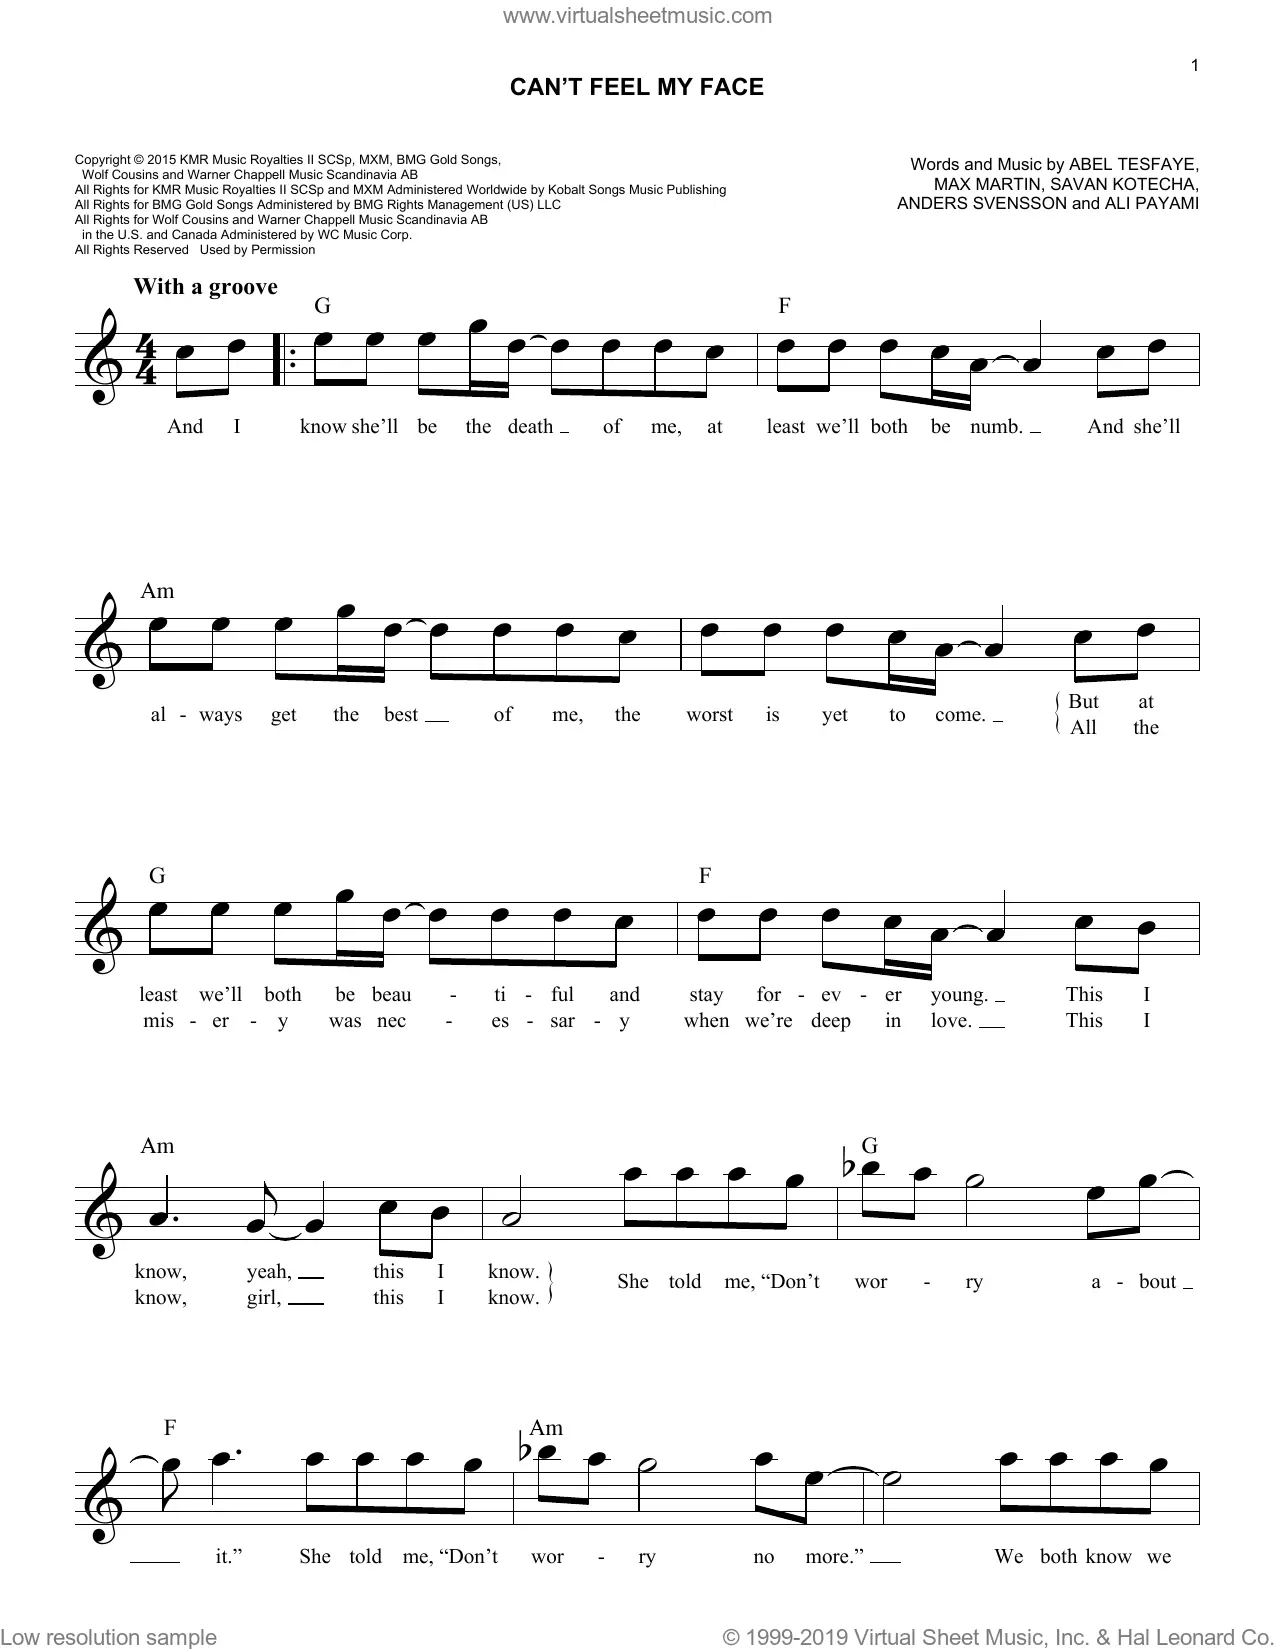 The Weeknd - Alone Again sheet music for piano download